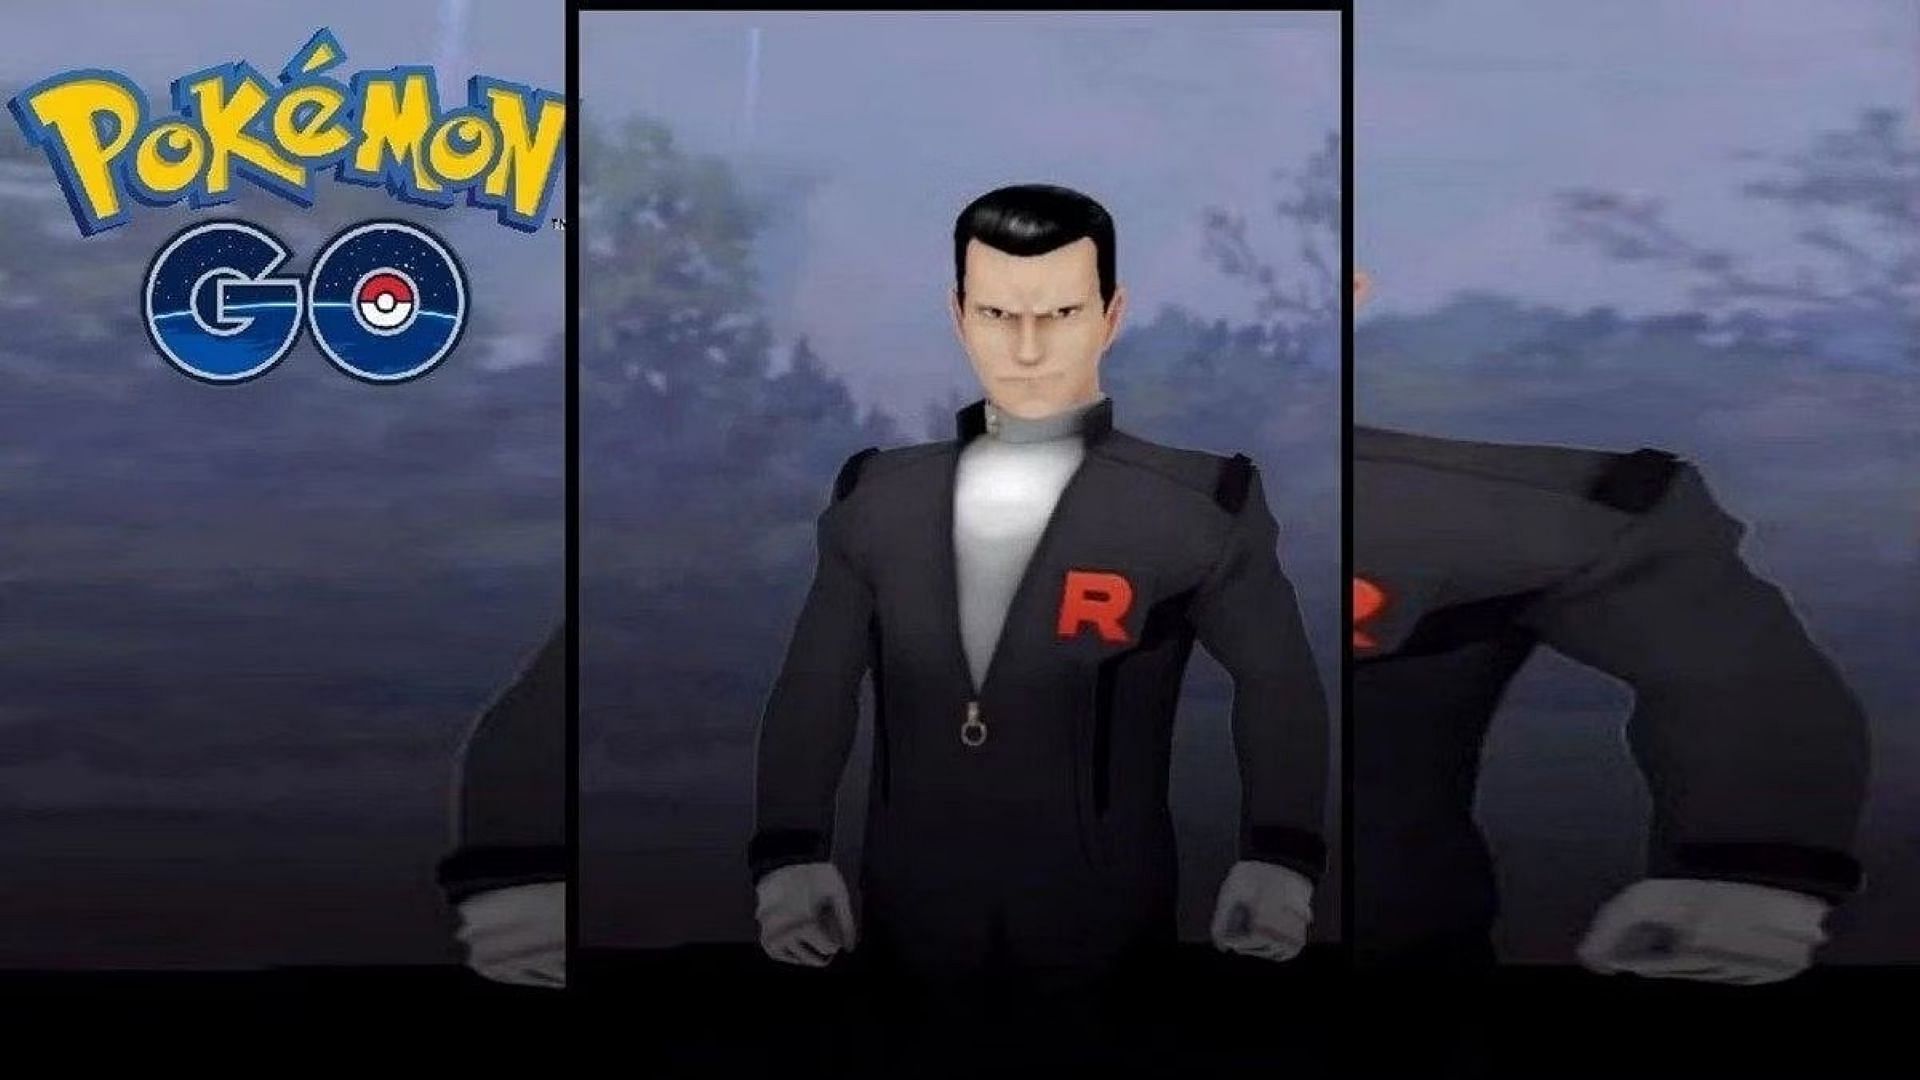 Giovanni is difficult to defeat in Pokemon GO (Image via Niantic)